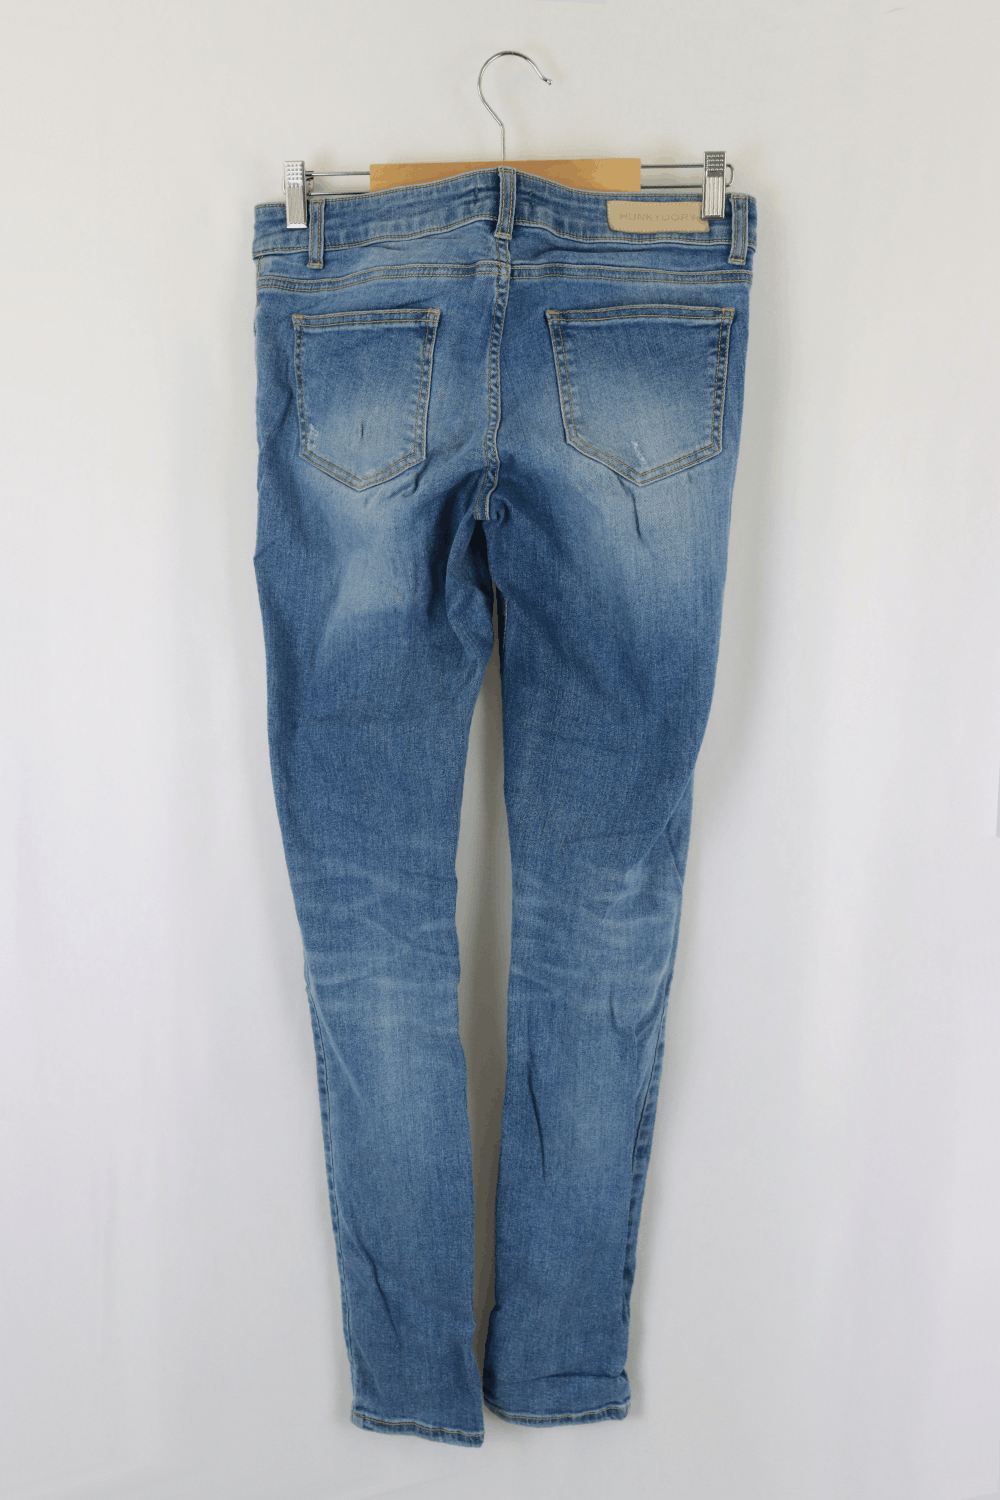 HunkyDory Slim Fit Mid Rise Blue Jeans 10